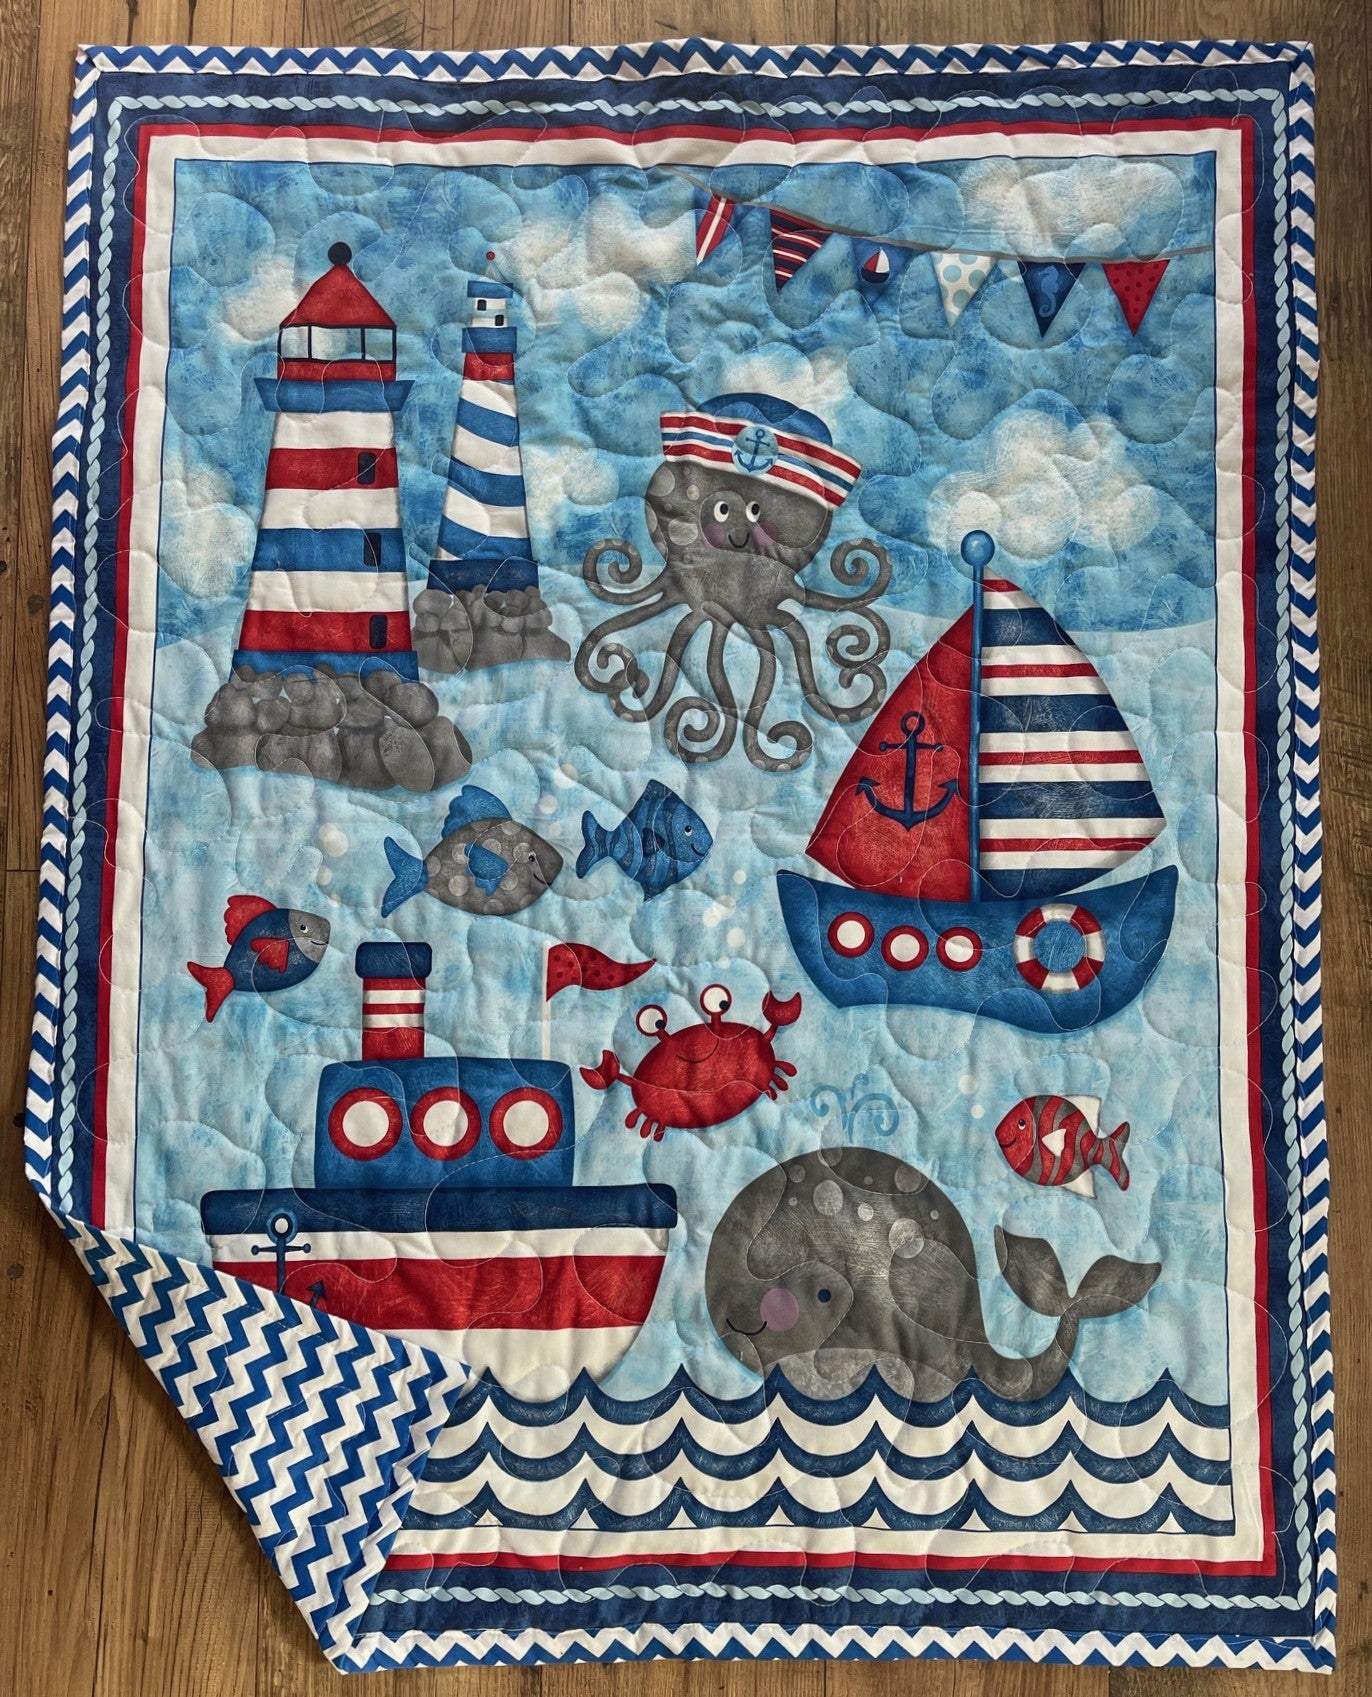 NAUTICAL USA THEME SEA ANIMALS, LIGHTHOUSE, SAILBOAT QUILTED BLANKET